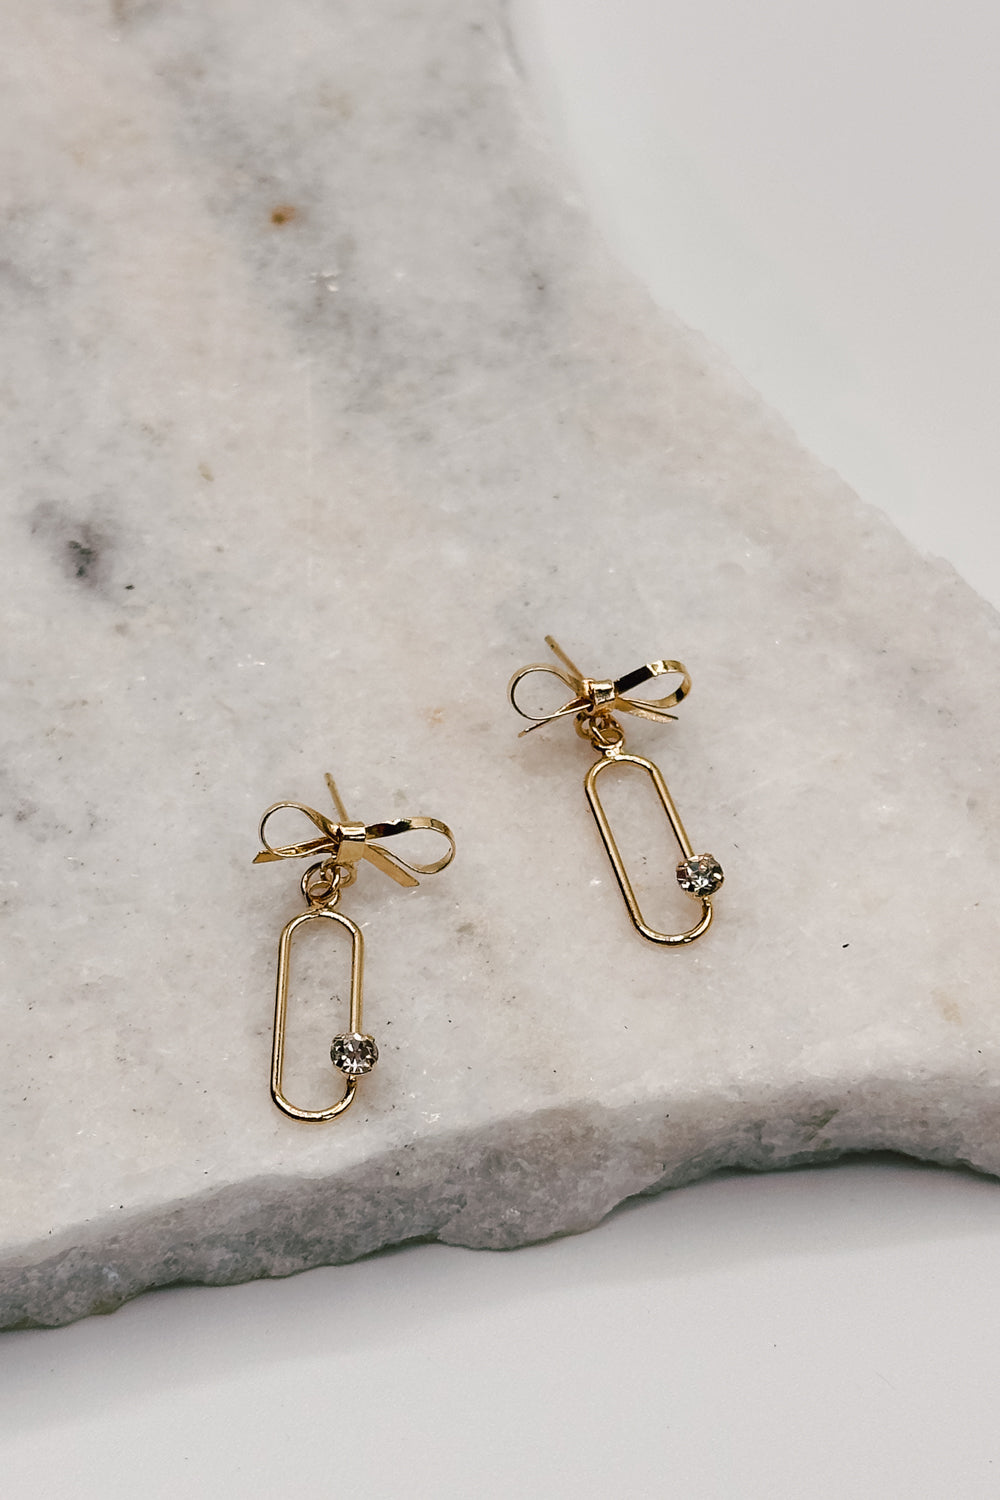 Close up view of the Ruth Gold Dipped Bow & Rhinestone Dangle Earring which features gold dipped bow studs linked with an open oval and rhinestone detail